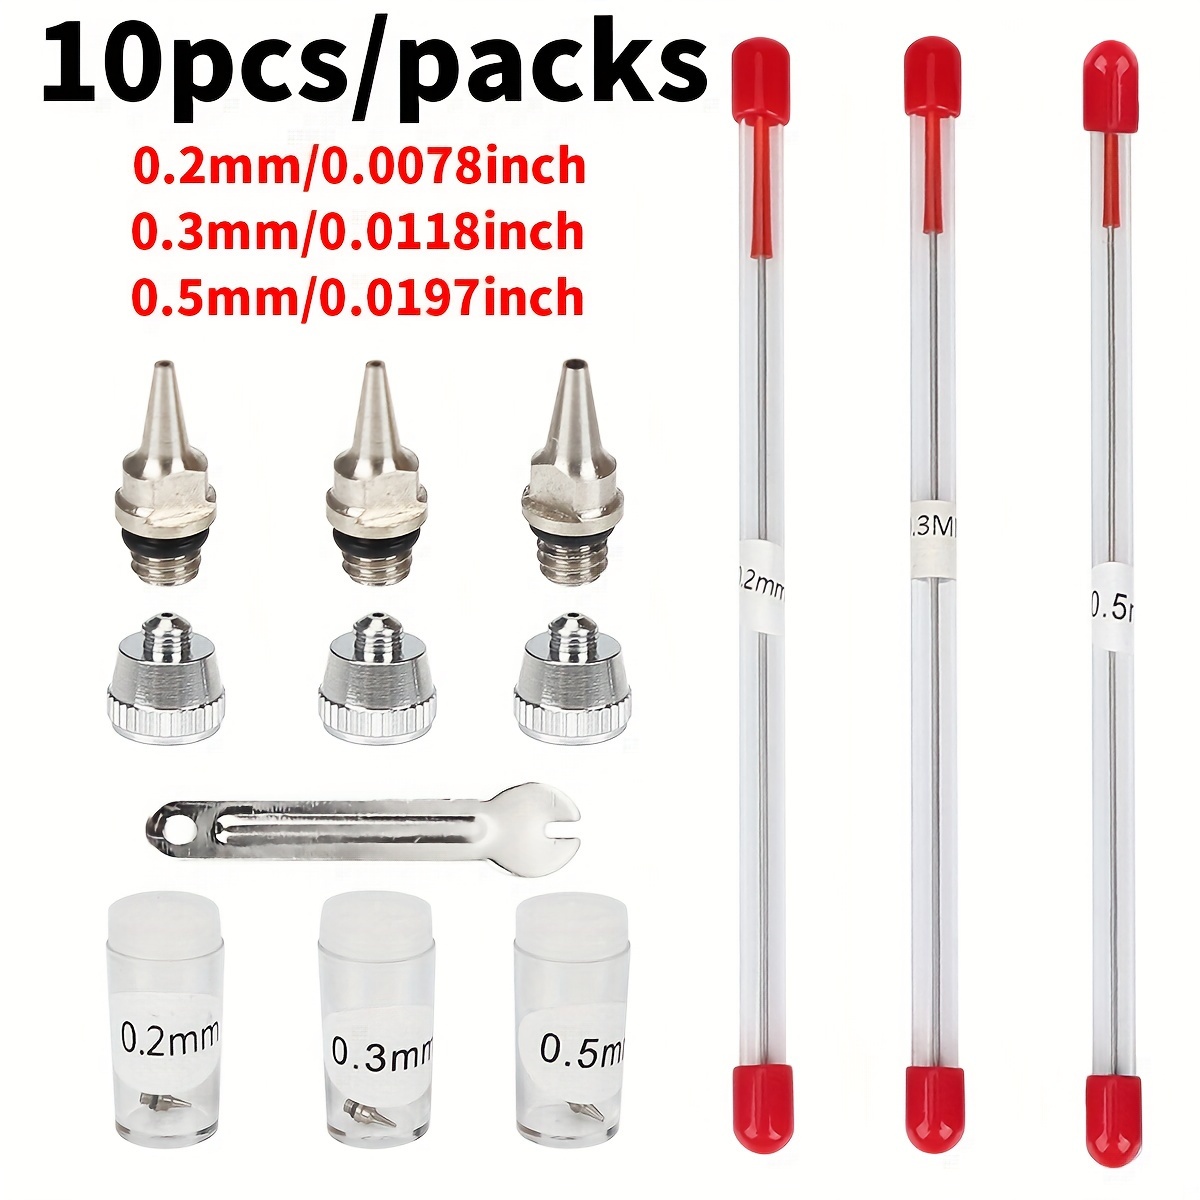 10 Pieces Airbrush Nozzle tool Nozzle Cap Kit With Wrench Airbrush  Replacement Parts For Spray Gun Sprayer Accessories, 0.2/0.3/0.5mm